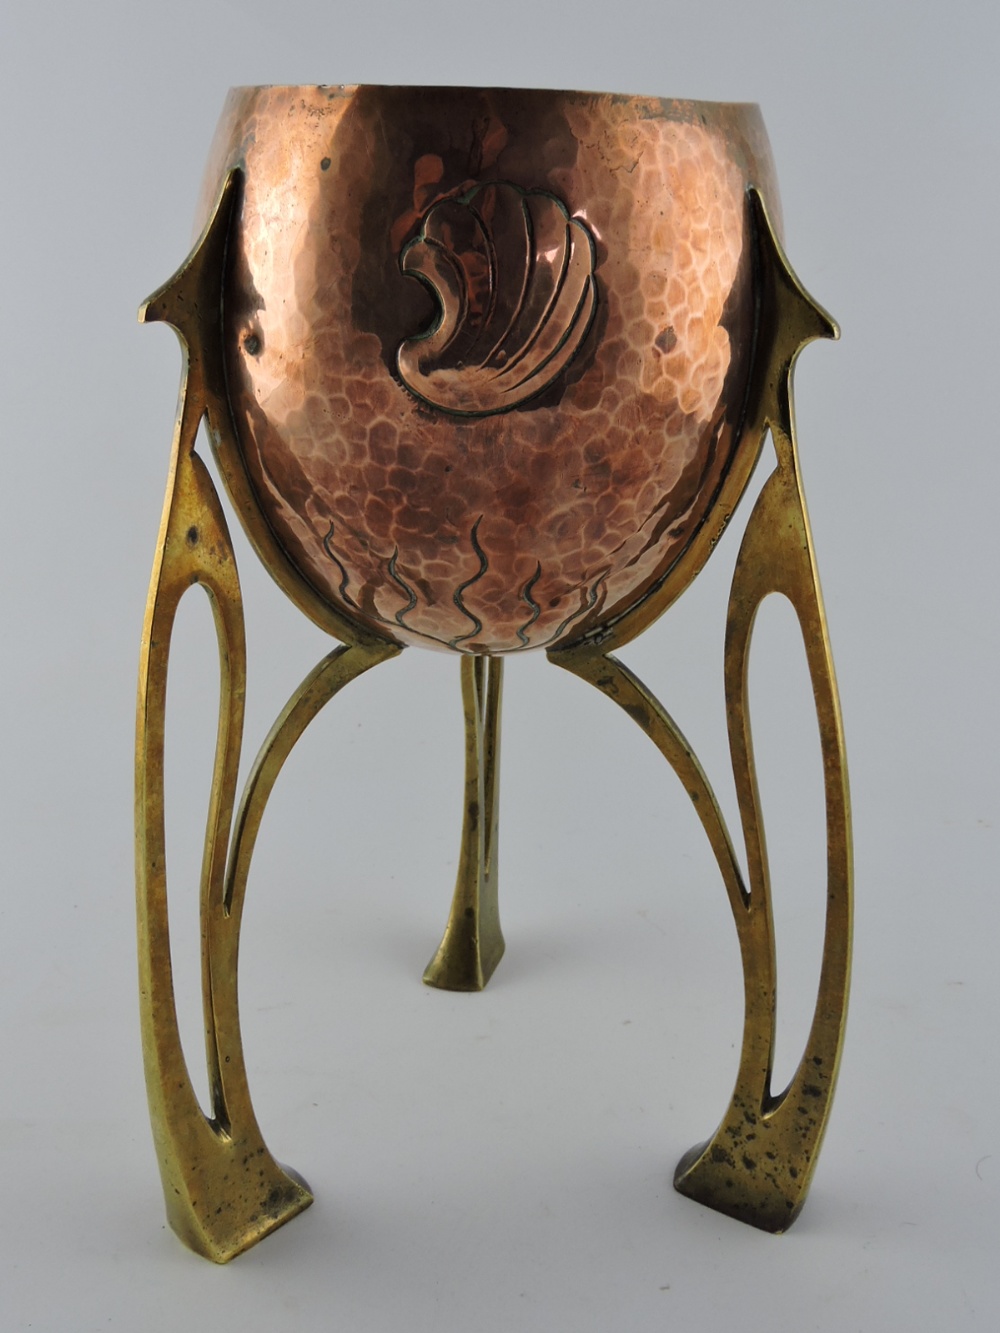 A WMF secessionist copper and brass bowl, the hammered body embossed shell and seaweed motif on